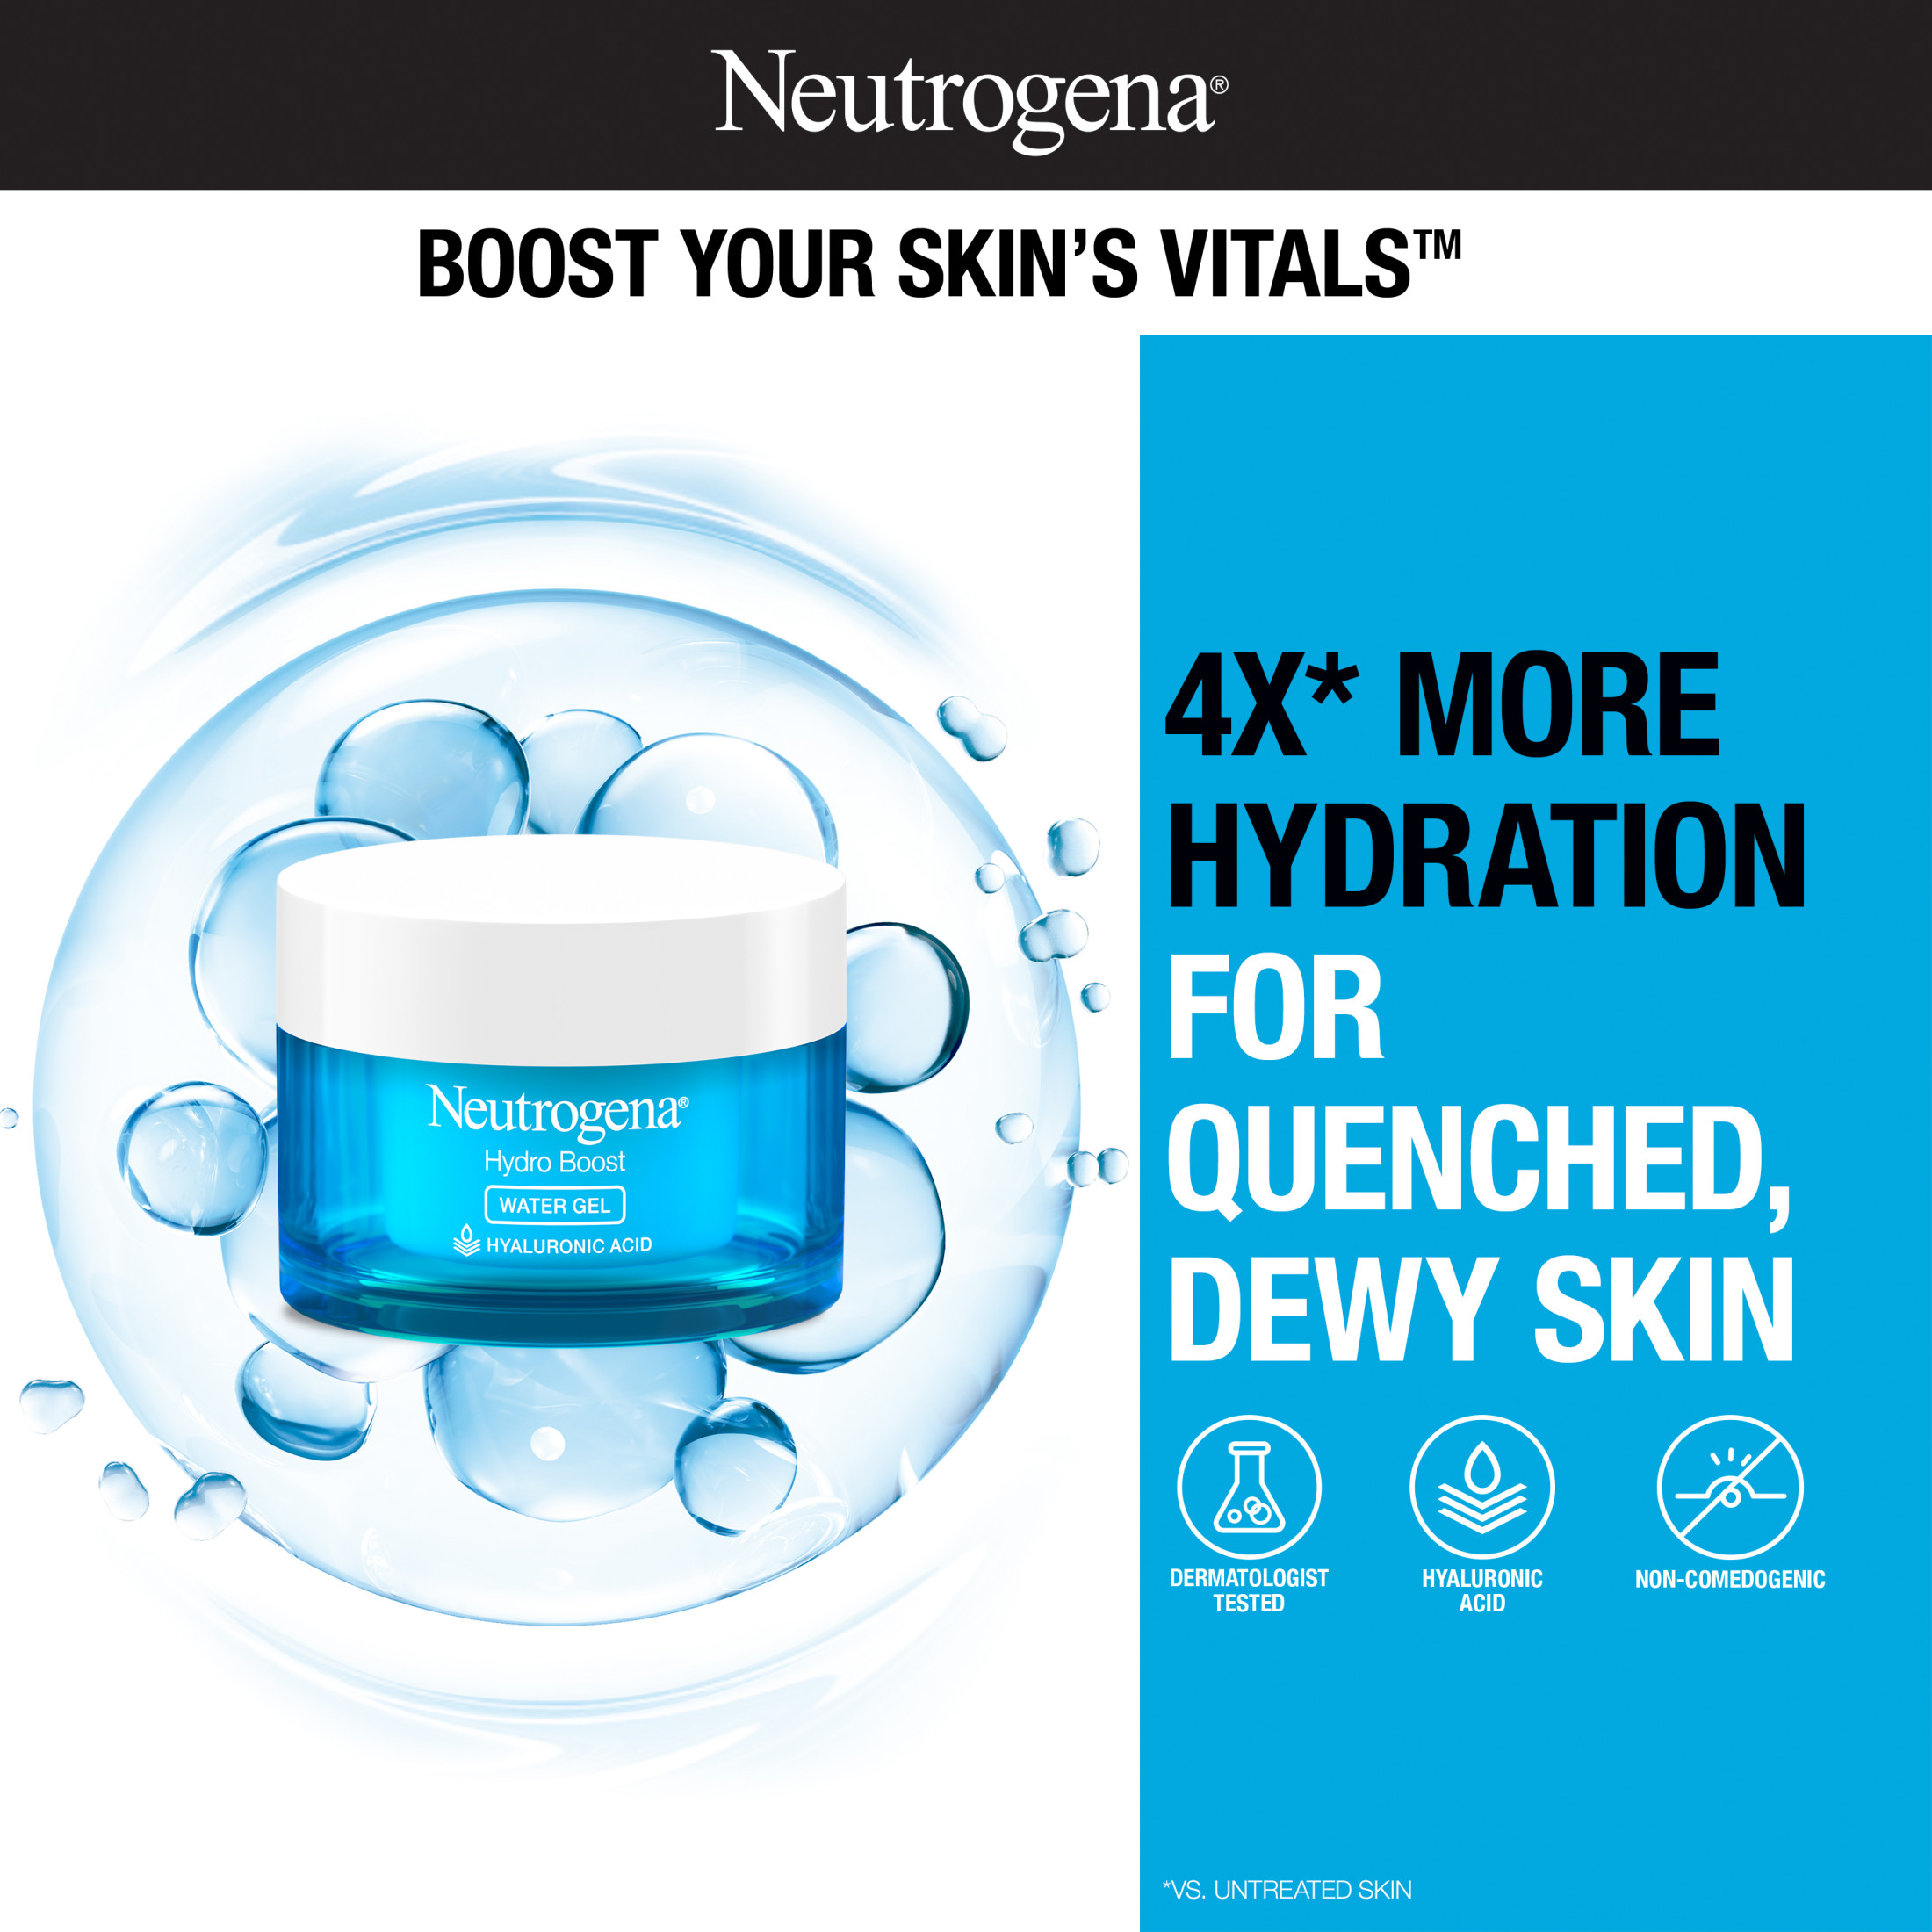 Neutrogena Hydro Boost Water Gel Face Moisturizer Lotion with Hyaluronic Acid, 1.7 oz - image 3 of 11